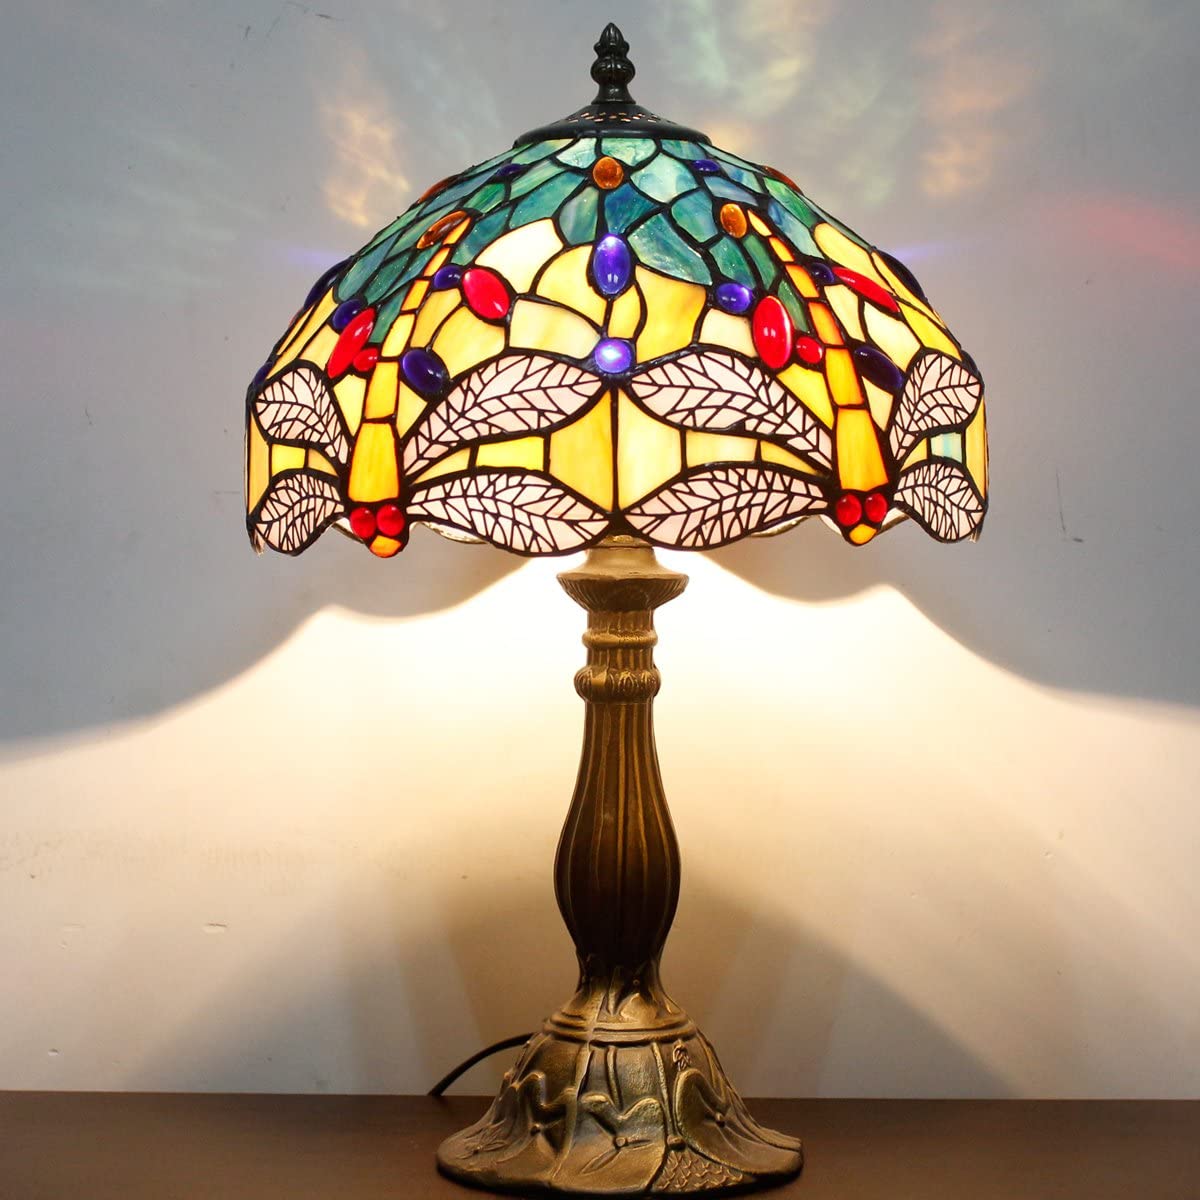 SHADY  Lamp Sea Blue Yellow Stained Glass Dragonfly Style Table Lamp Nautical Reading Desk Bedside Light 12X12X18 Inches Decor Bedroom Living Room Home Office S128 Series